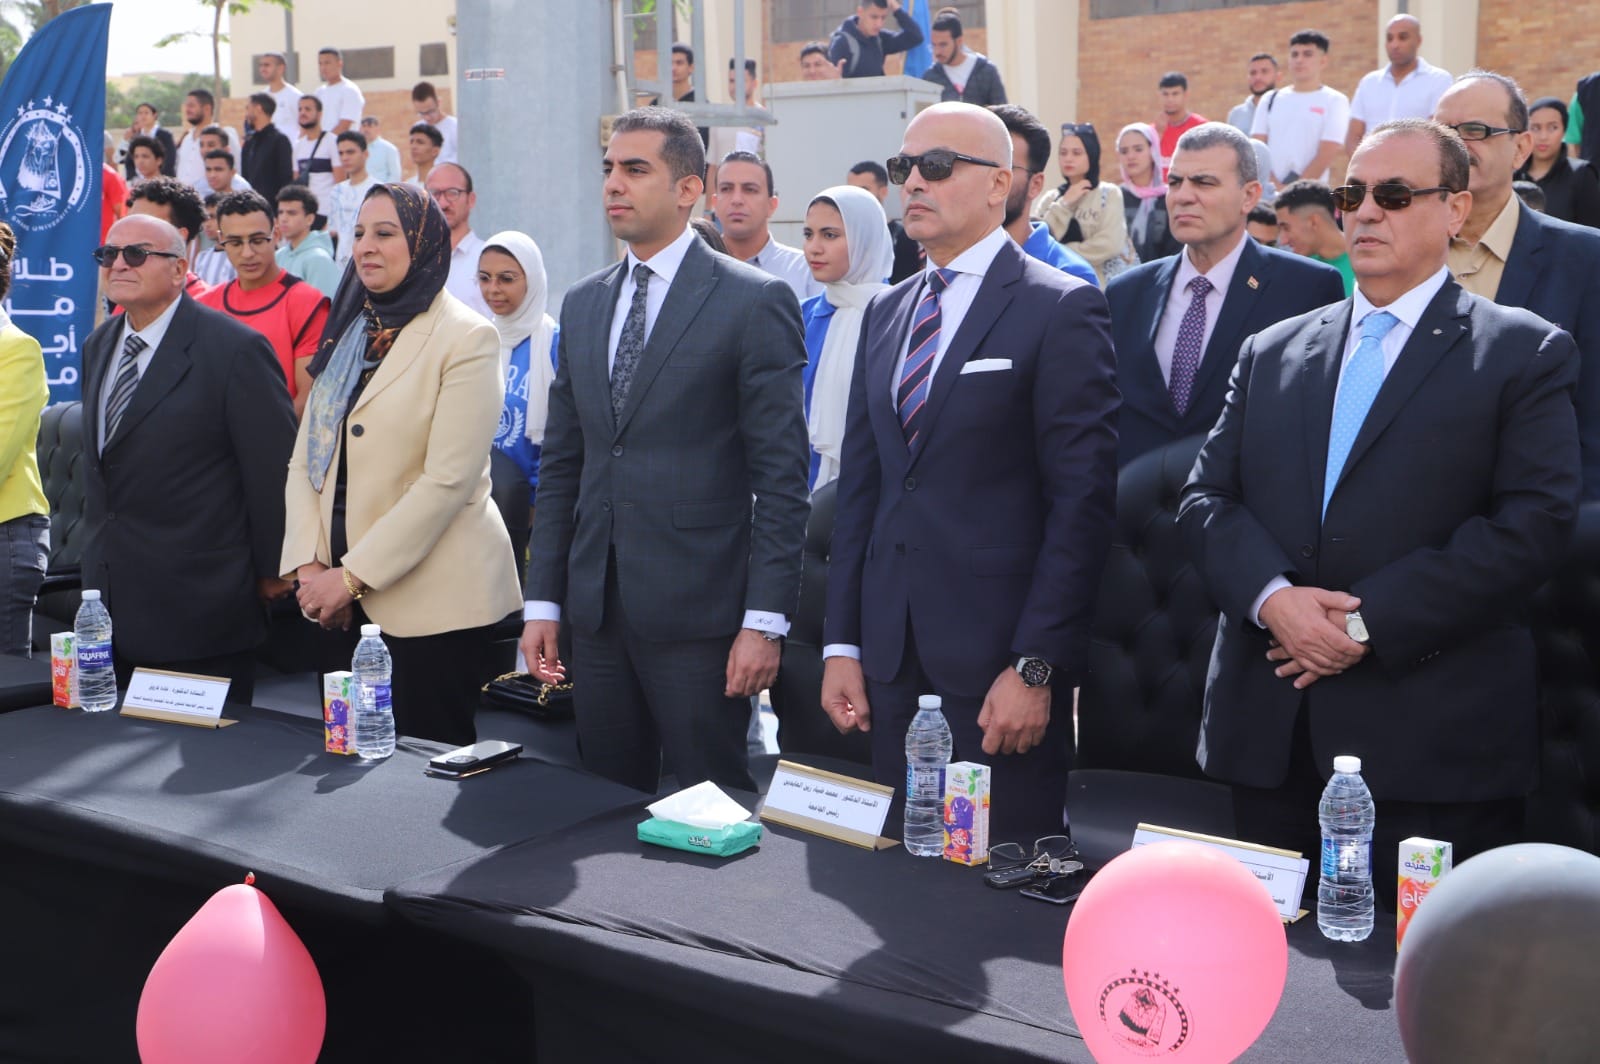 The President of Ain Shams University witnesses the launch of the "Students for Egypt League" at Ain Shams University